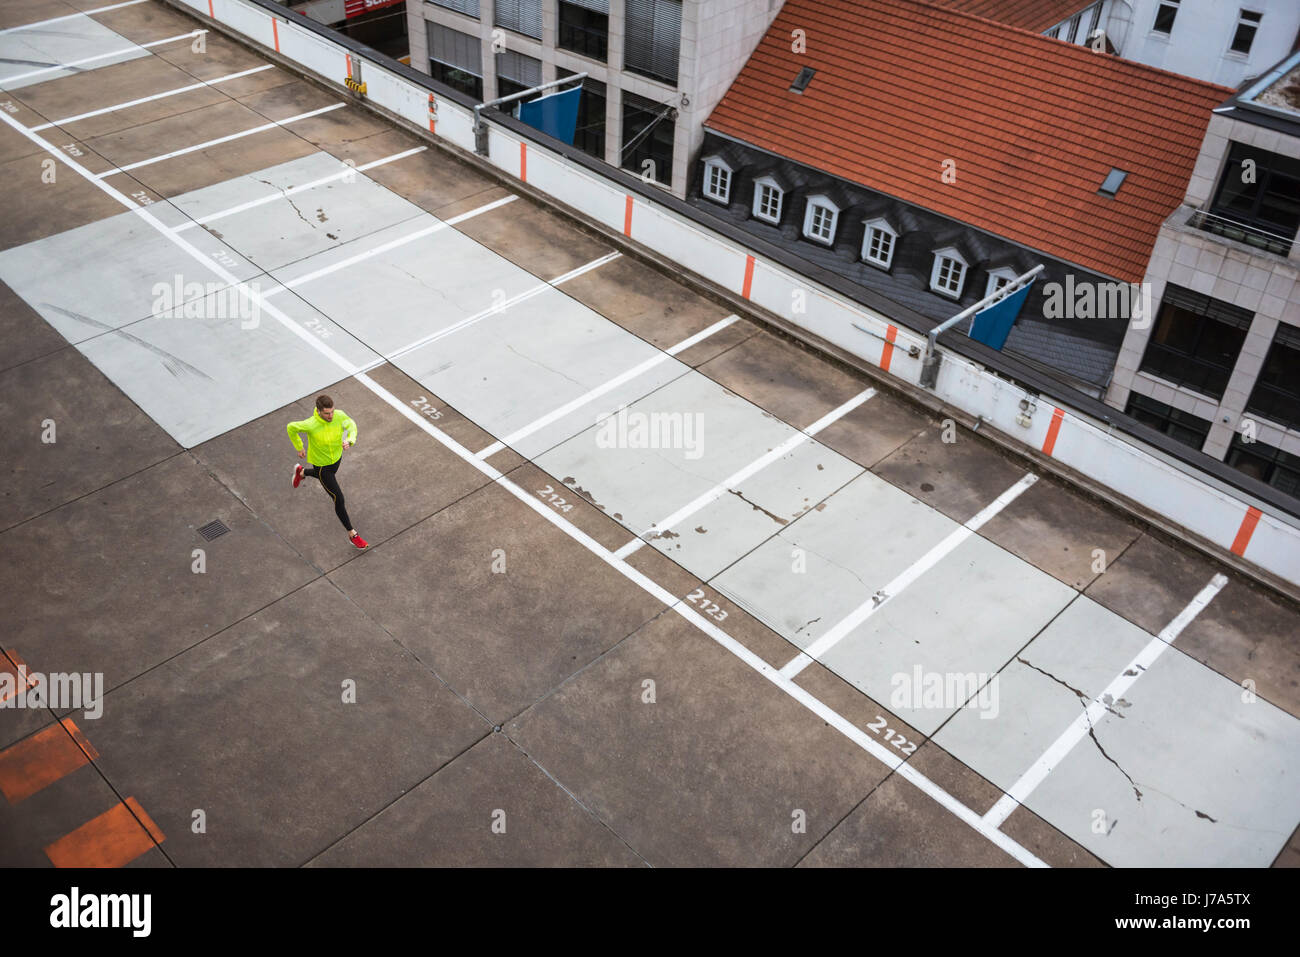 Young man running on parking level Stock Photo